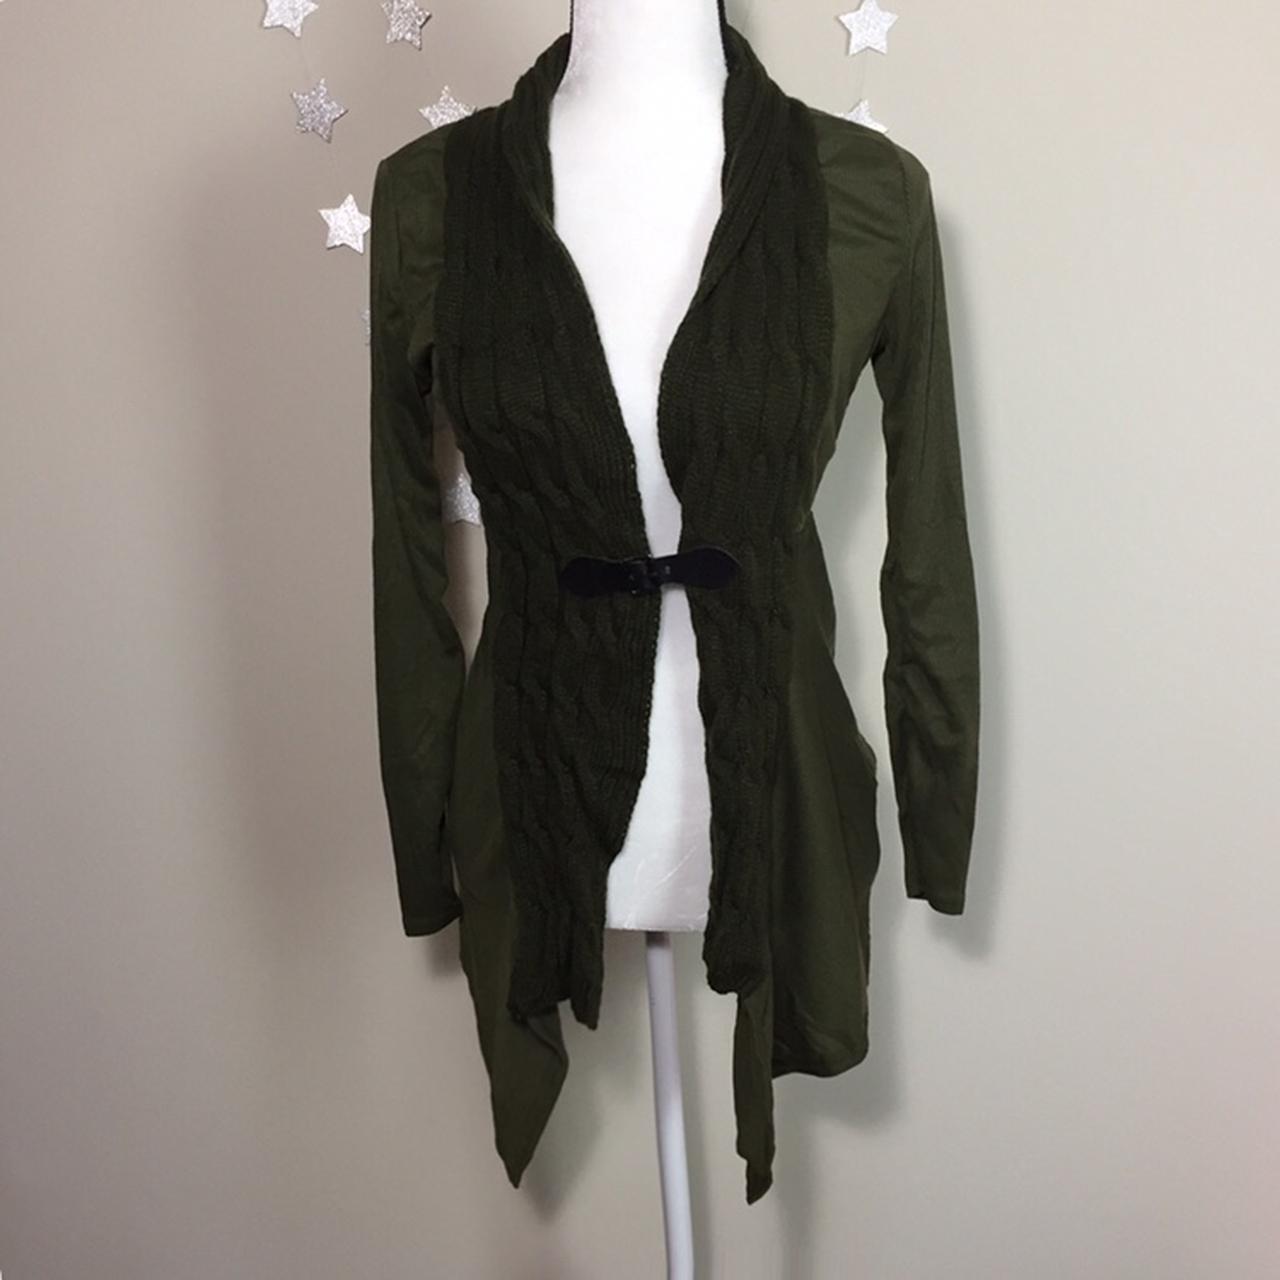 🧚‍♂️🌿 Gorgeous olive-forest green cardigan top! So... - Depop